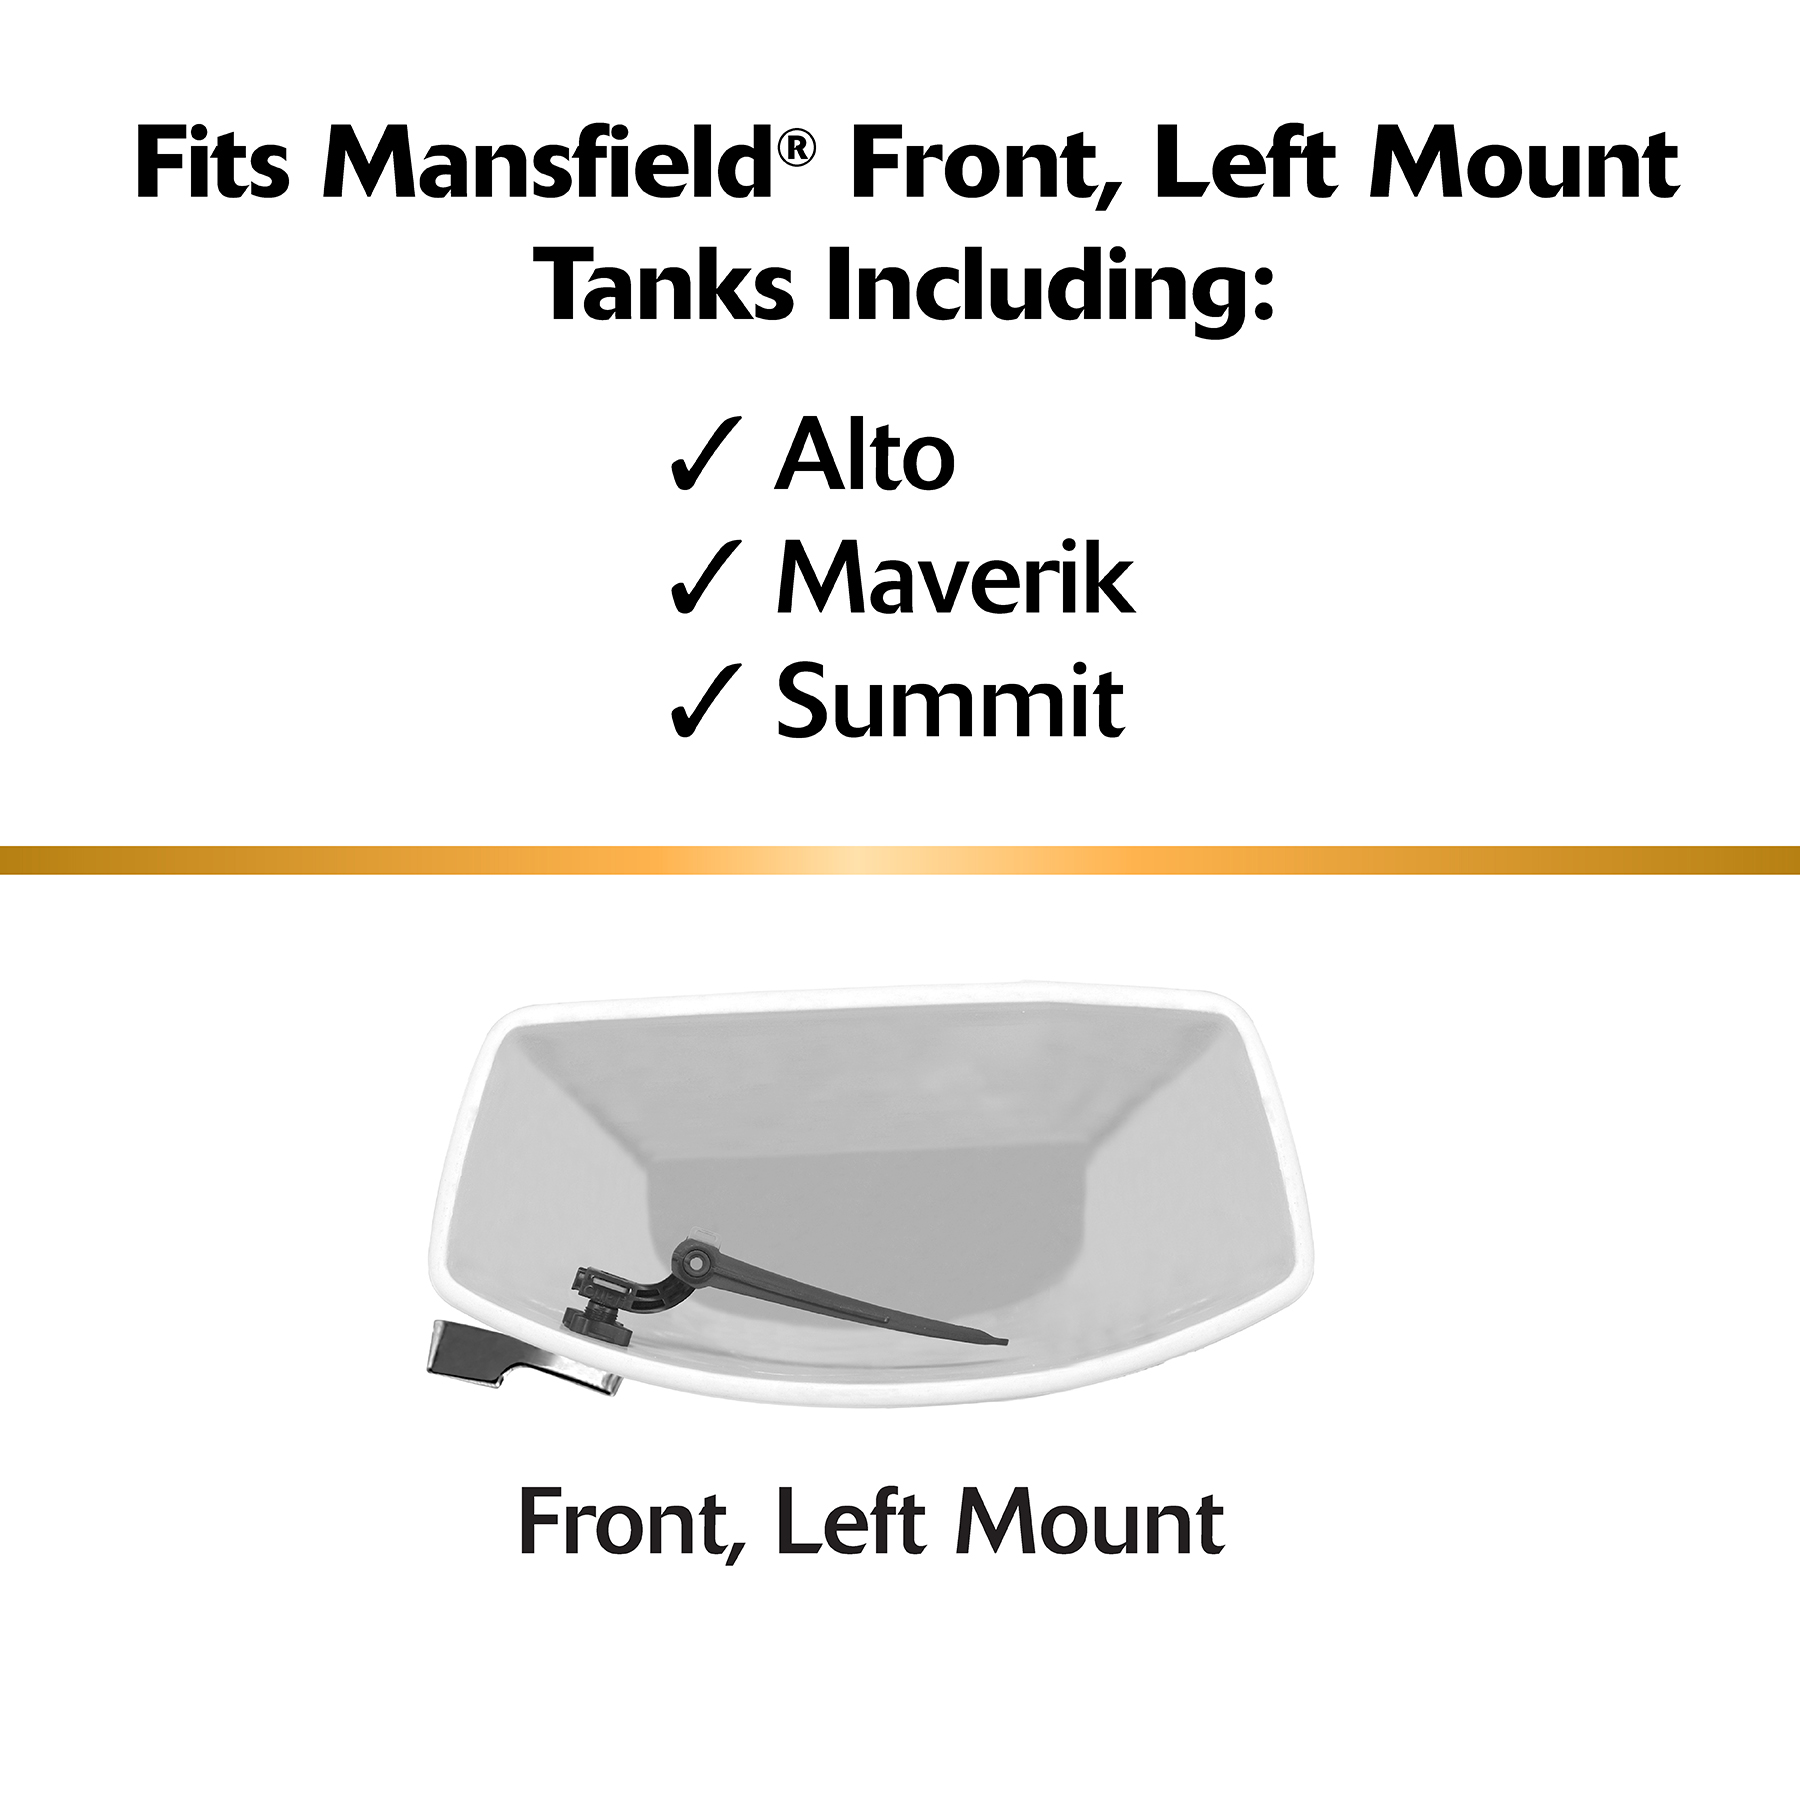 fits mansfield front, left mount tanks including alto maverik and summit